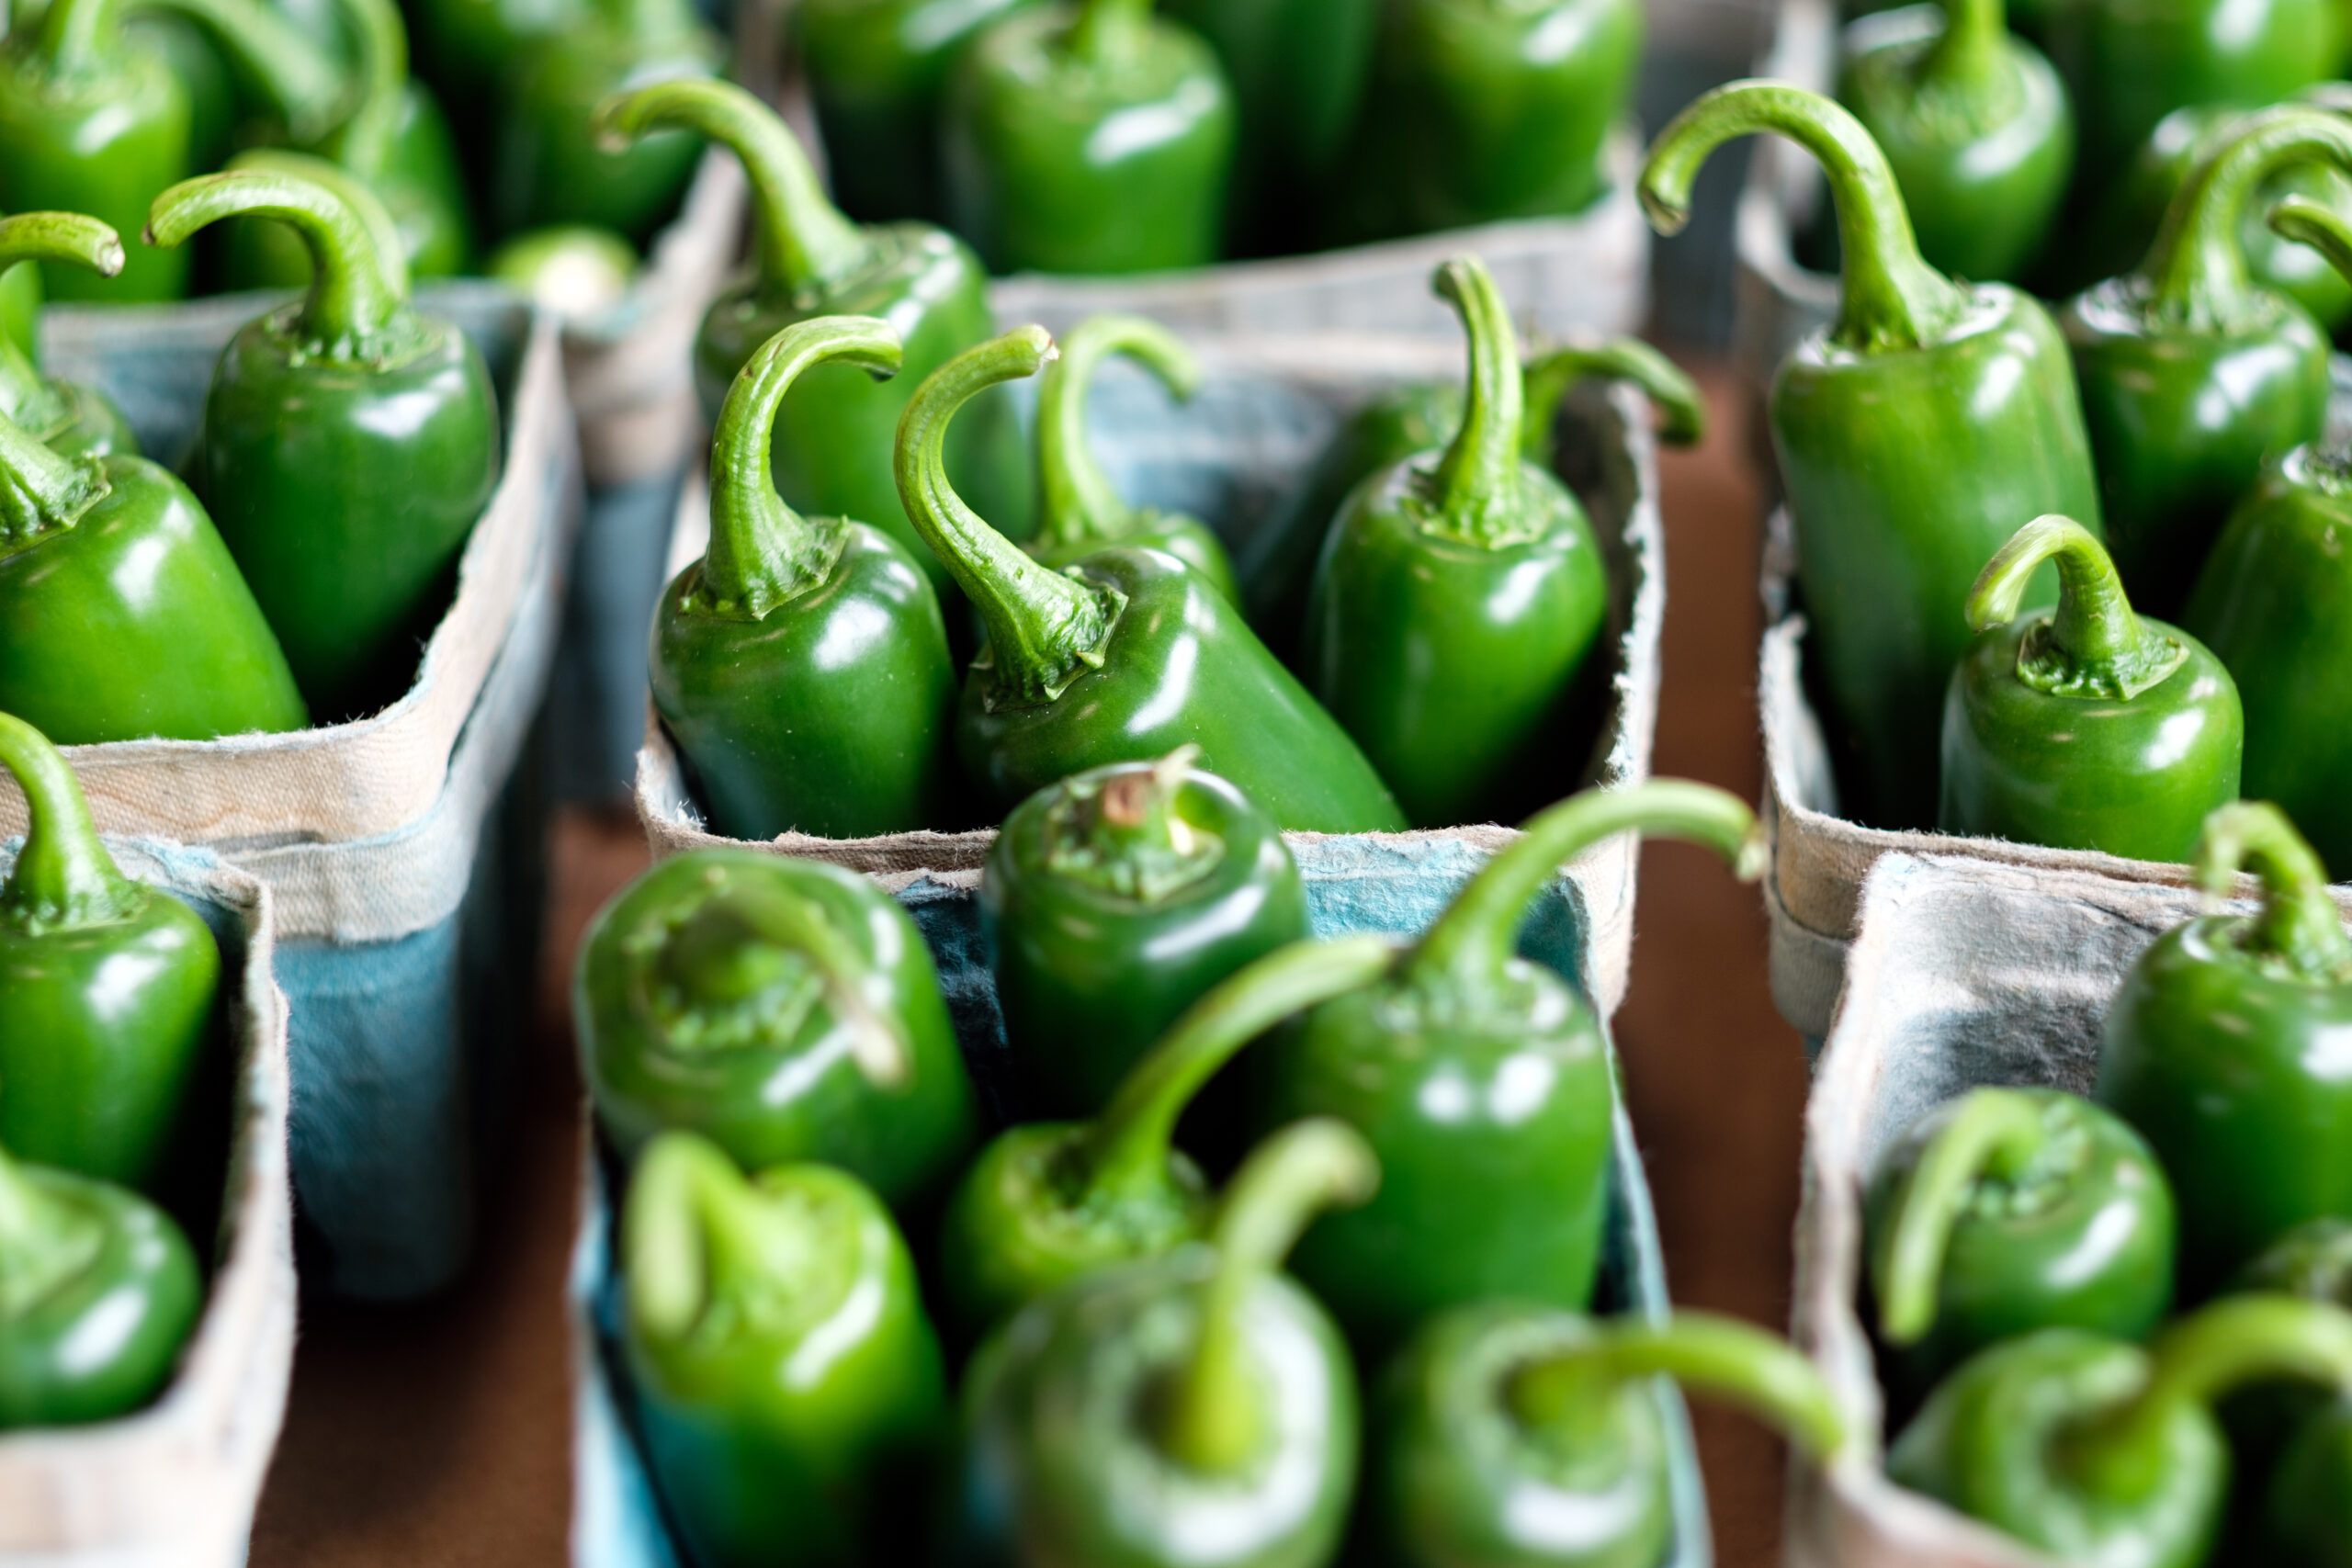 Jalapeno wallpapers, Fiery images, Spice-inspired visuals, High-definition graphics, 2560x1710 HD Desktop